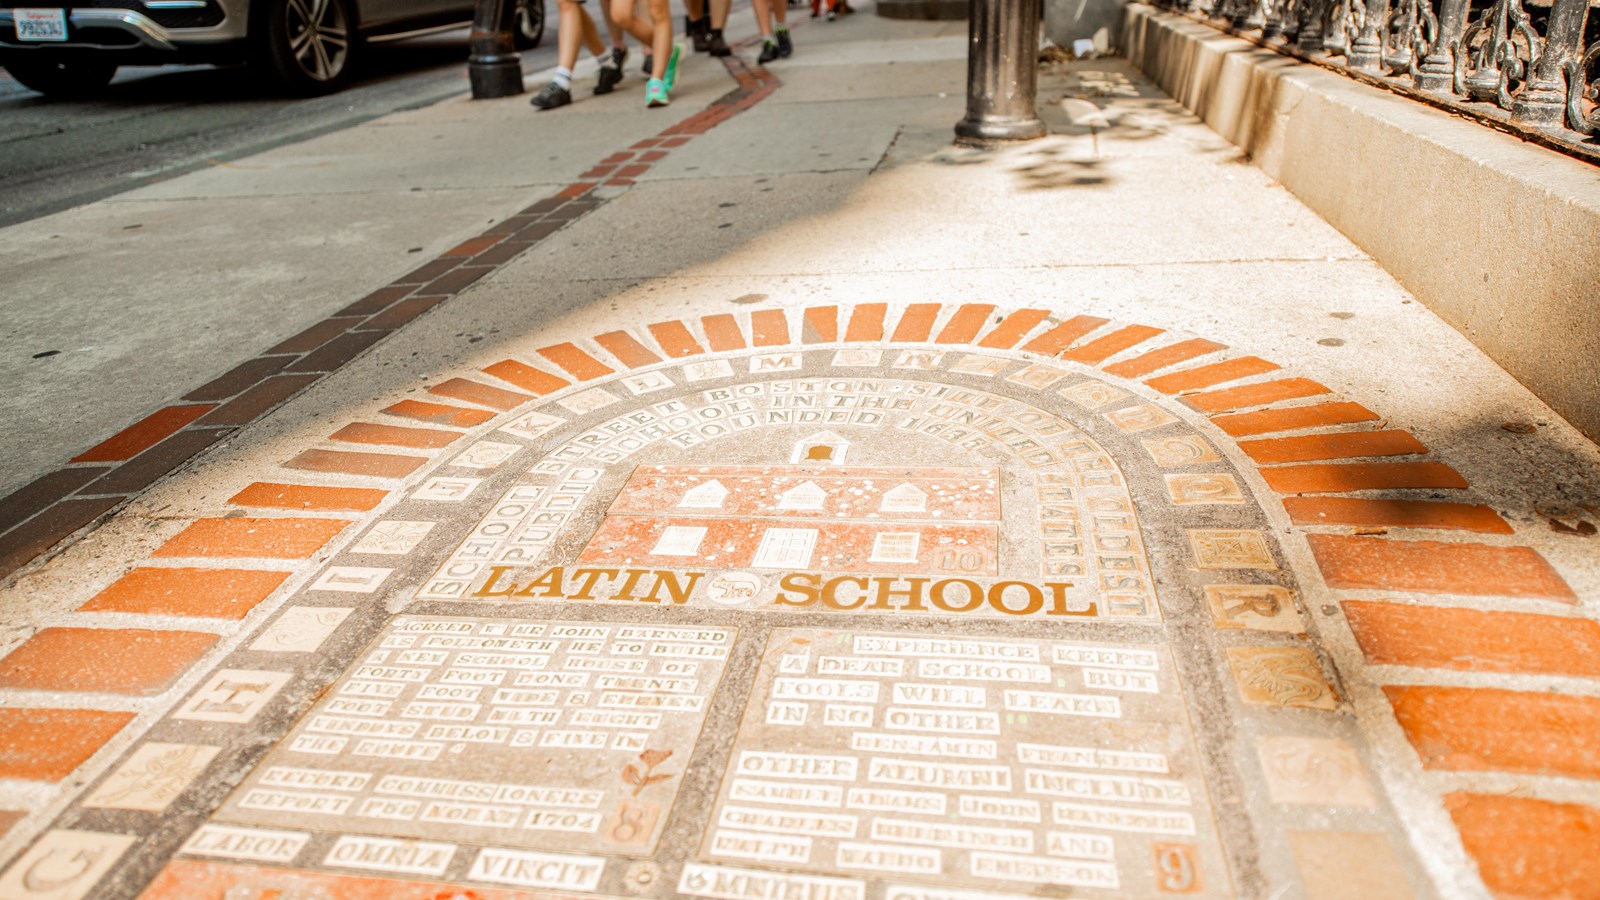 Photograph of a mosaic set in a sidewalk depicting a schoolhouse and other education elements.